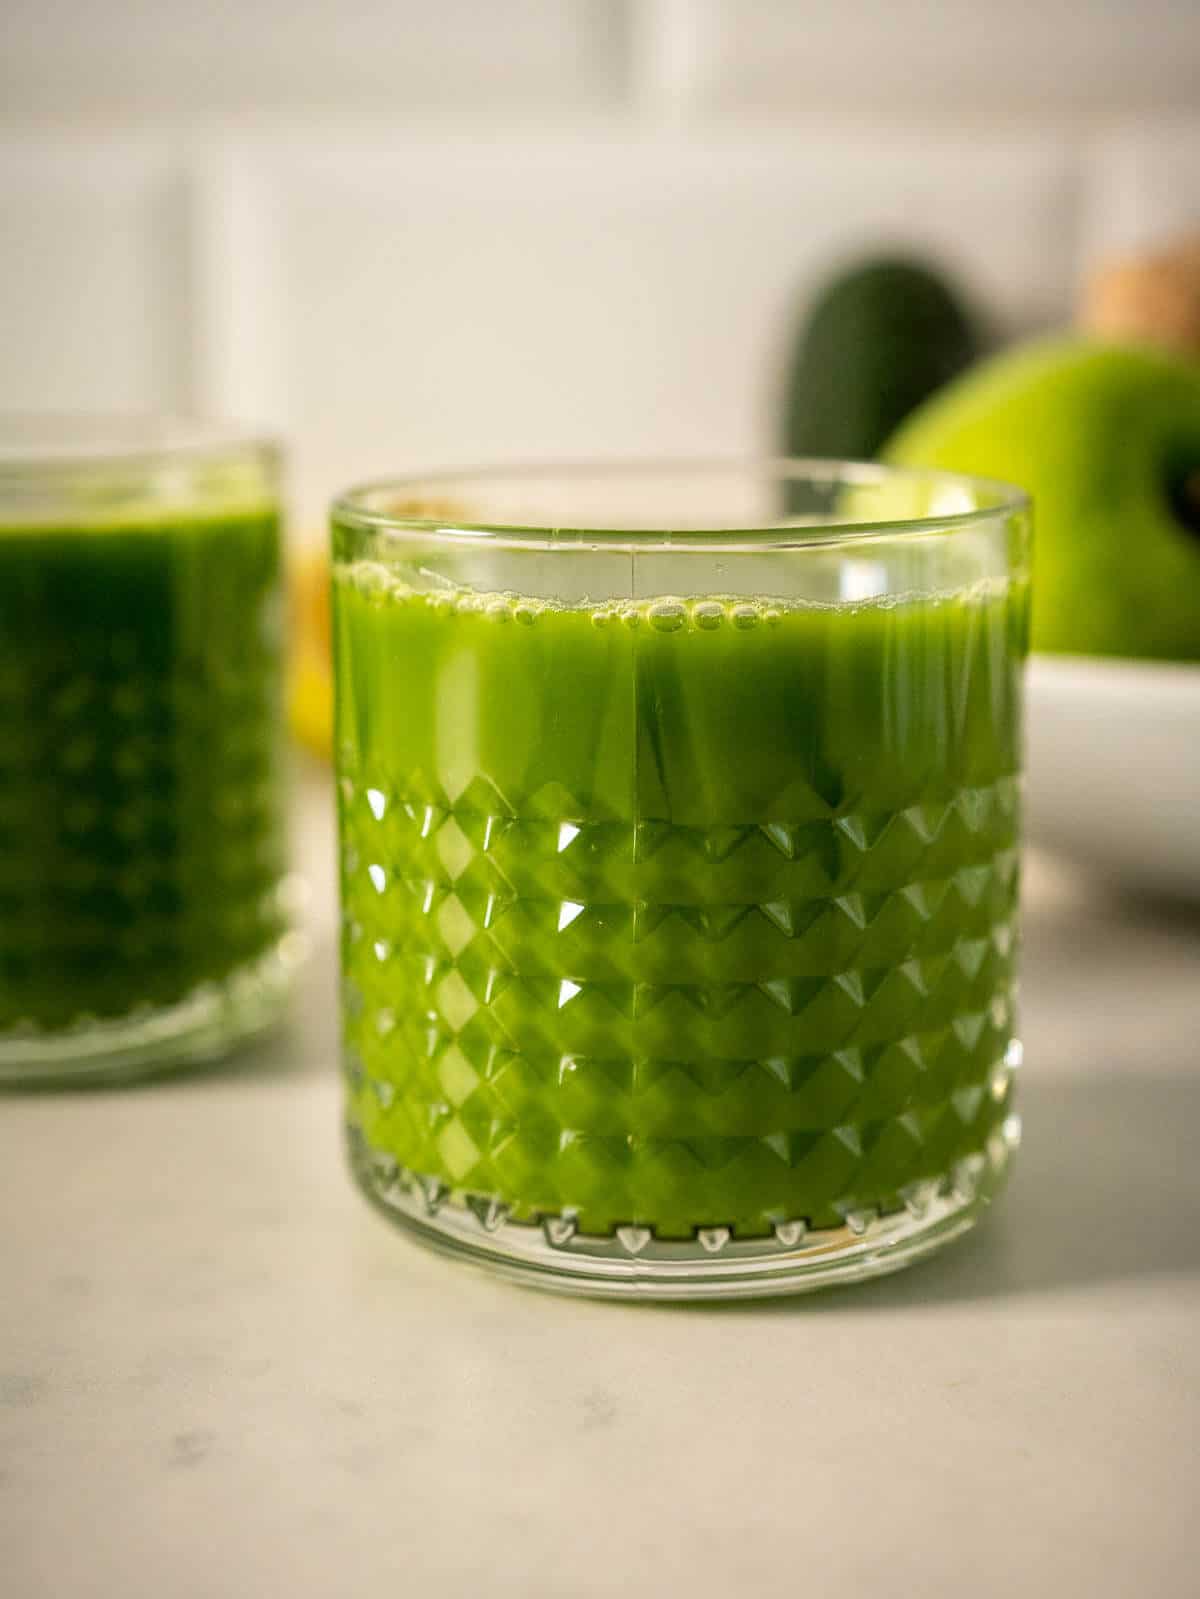 Hydrating Spinach and Green Mean apple juice glass.